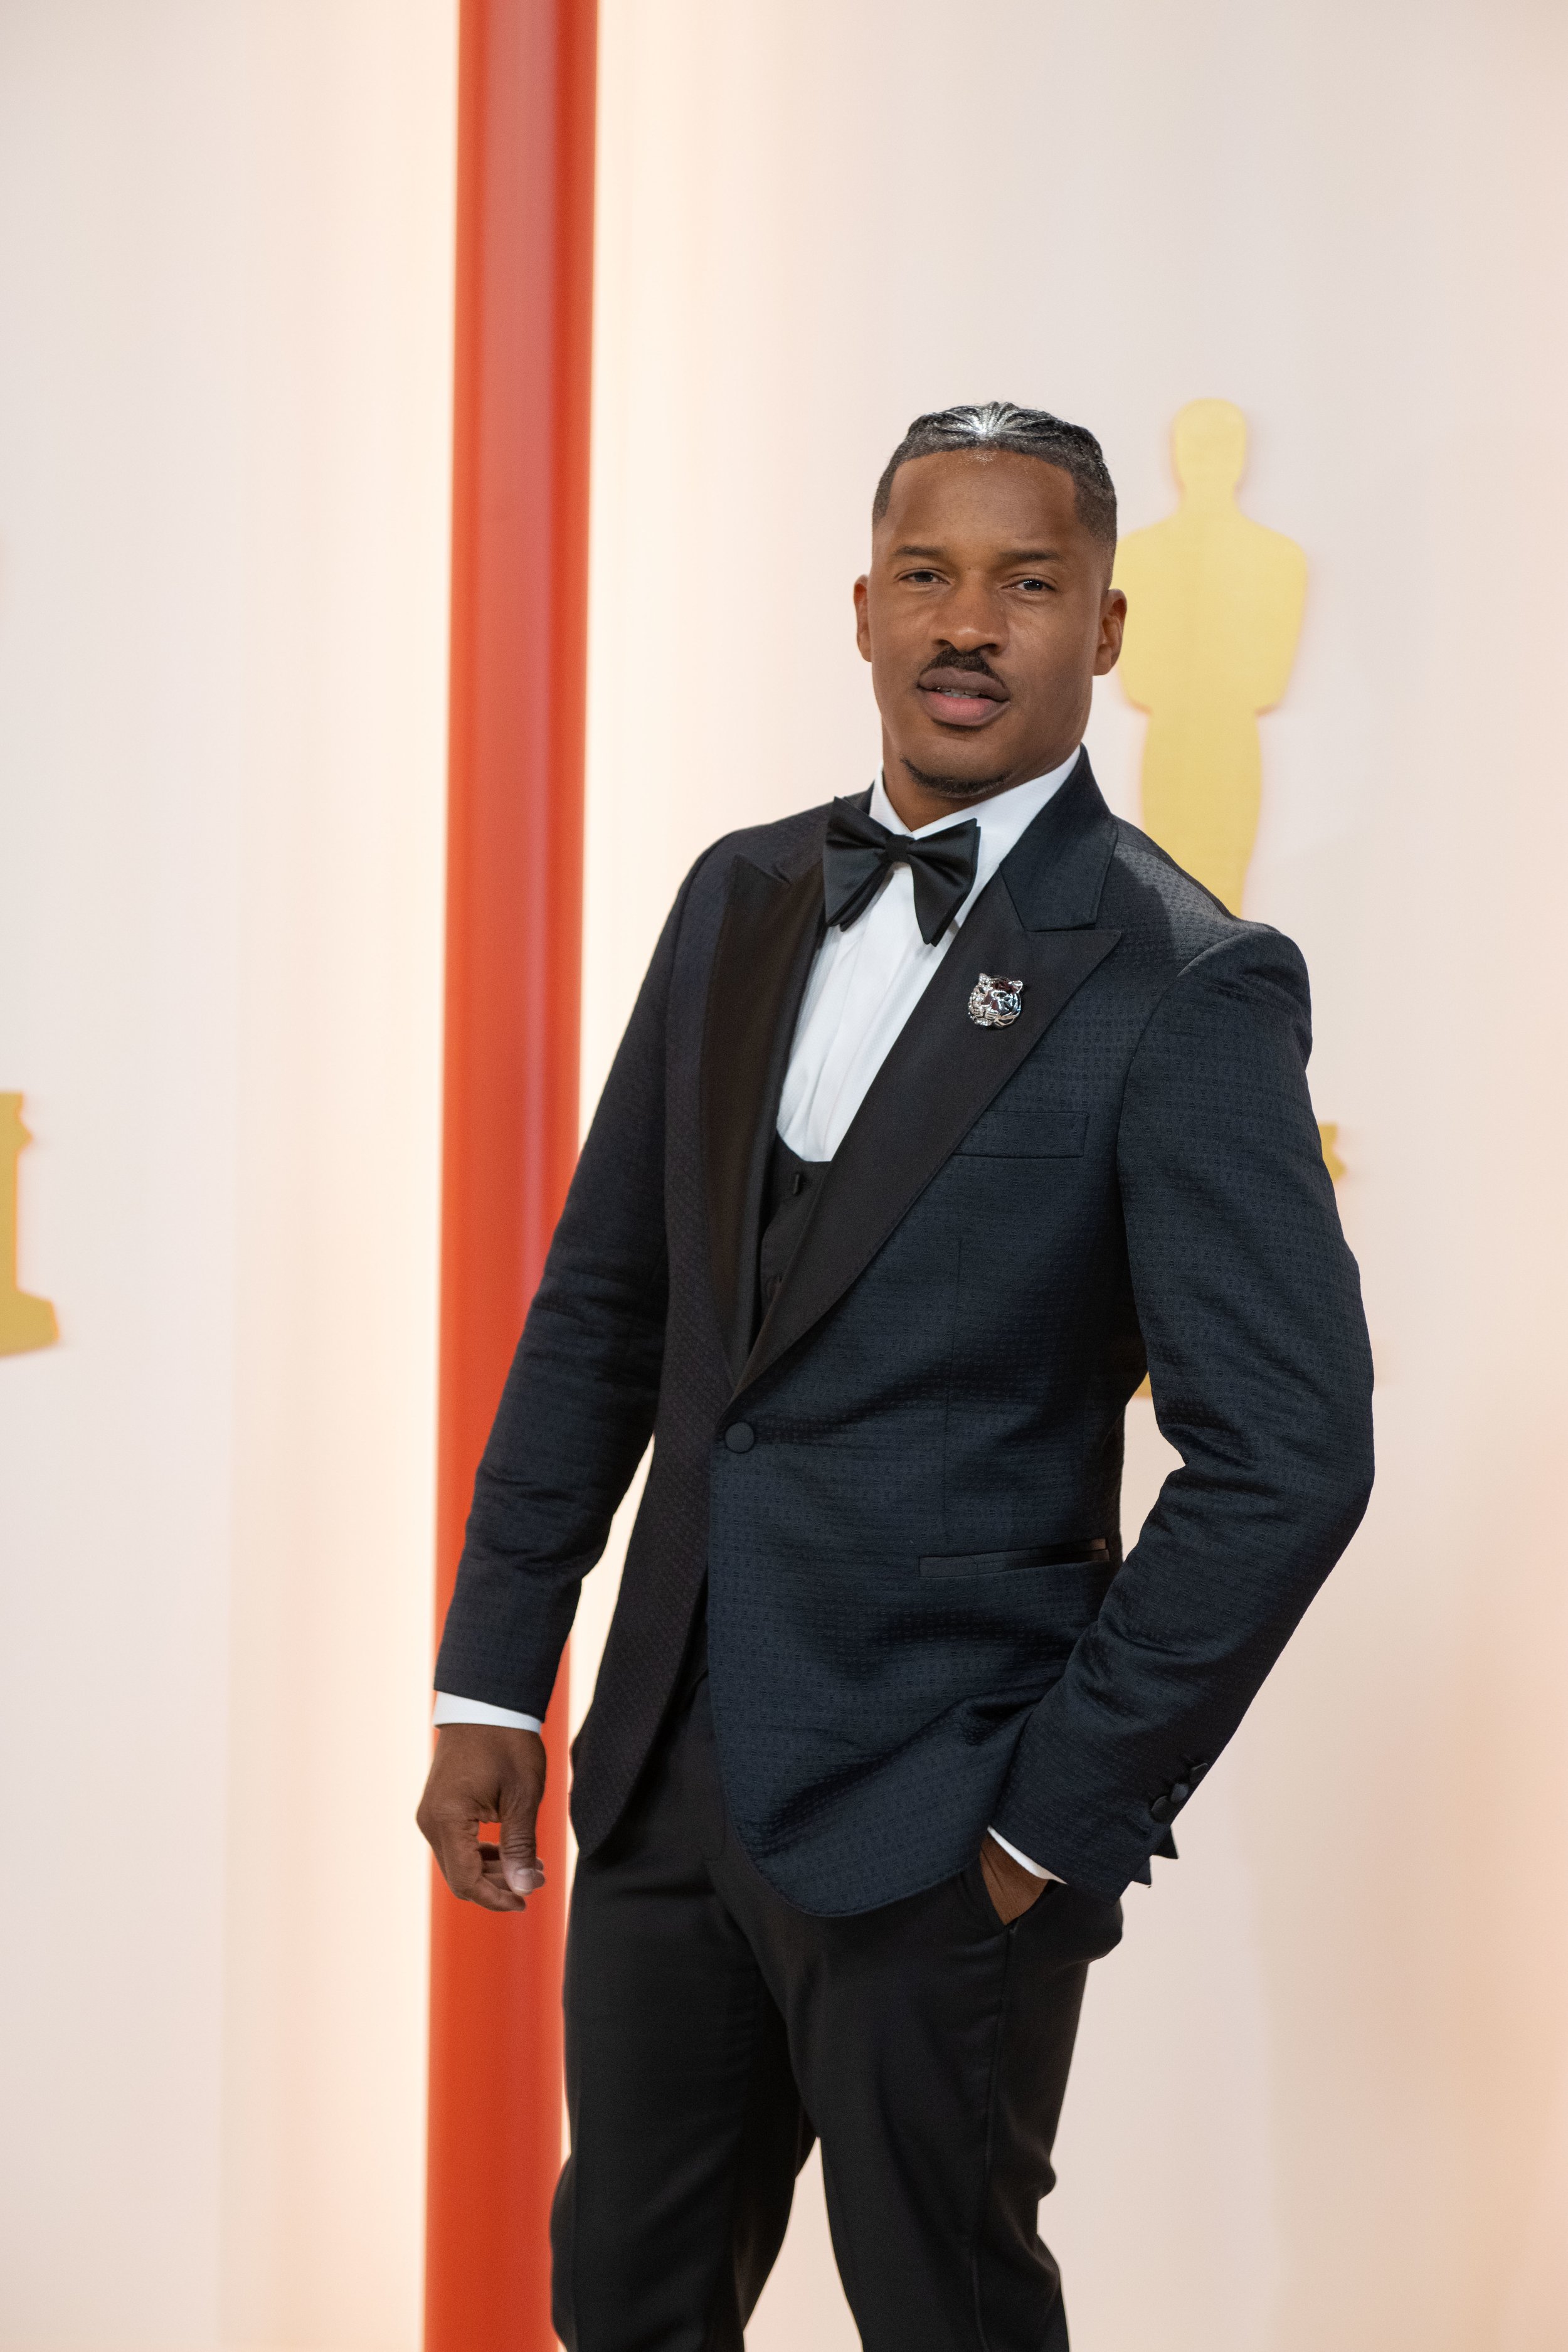 Nate Parker arrives on the red carpet of the 95th Oscars